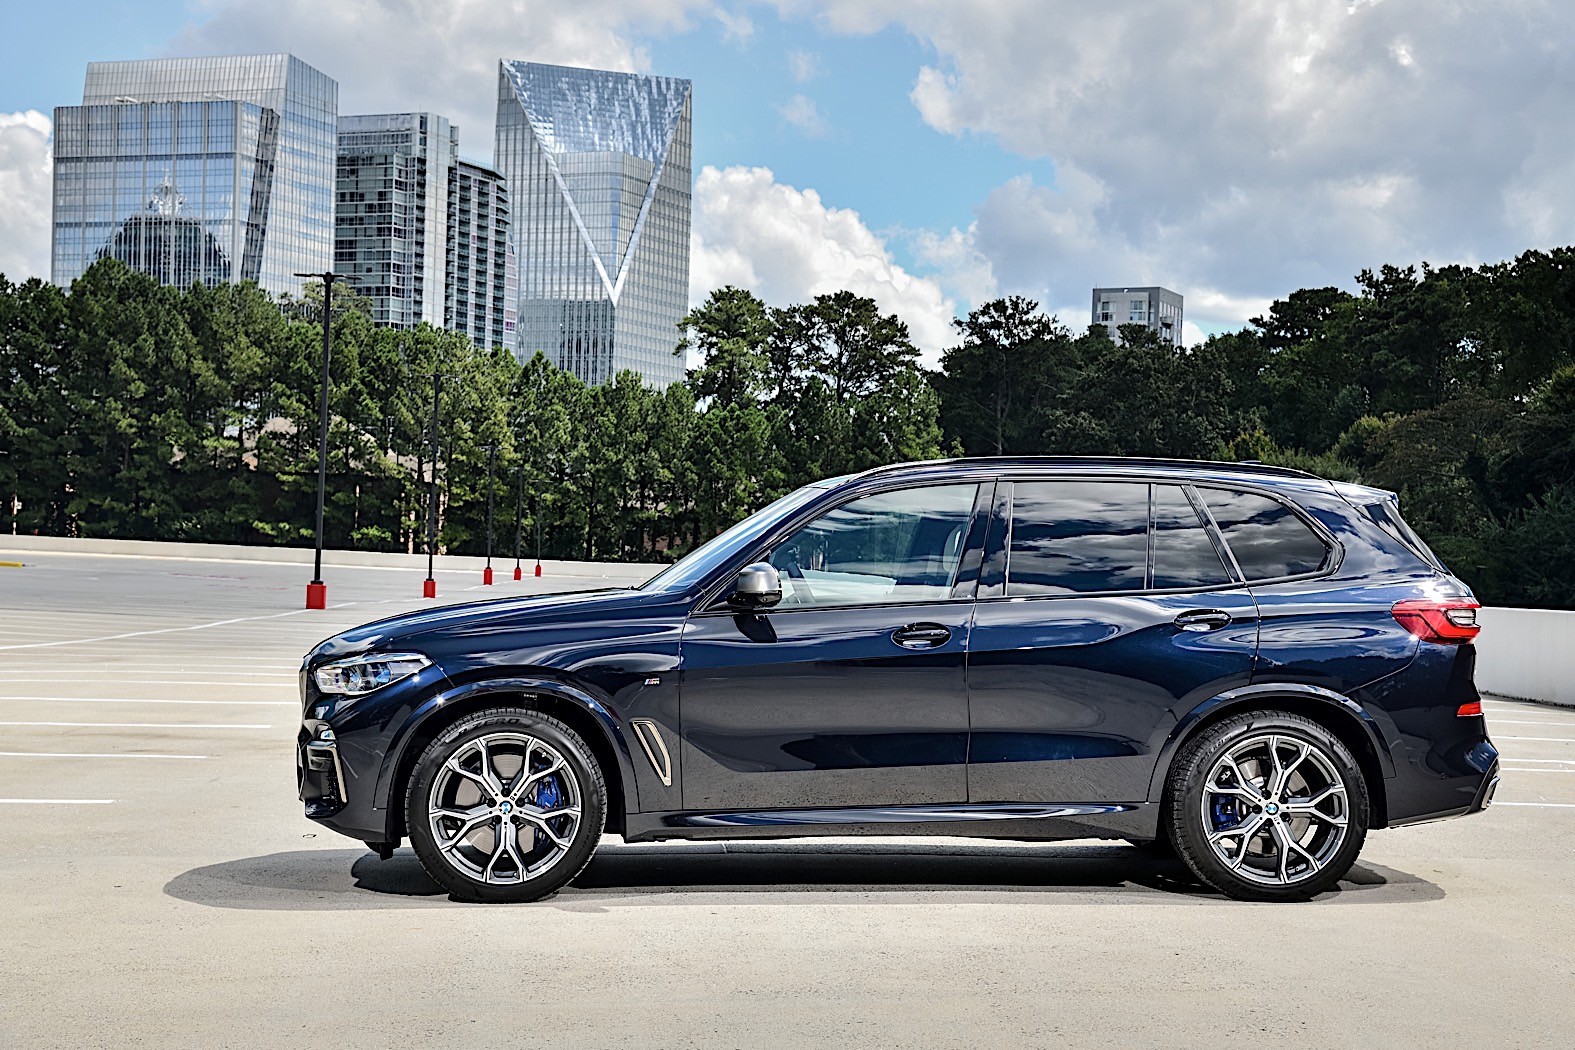 2019 BMW X5 Shown on Location Once More autoevolution